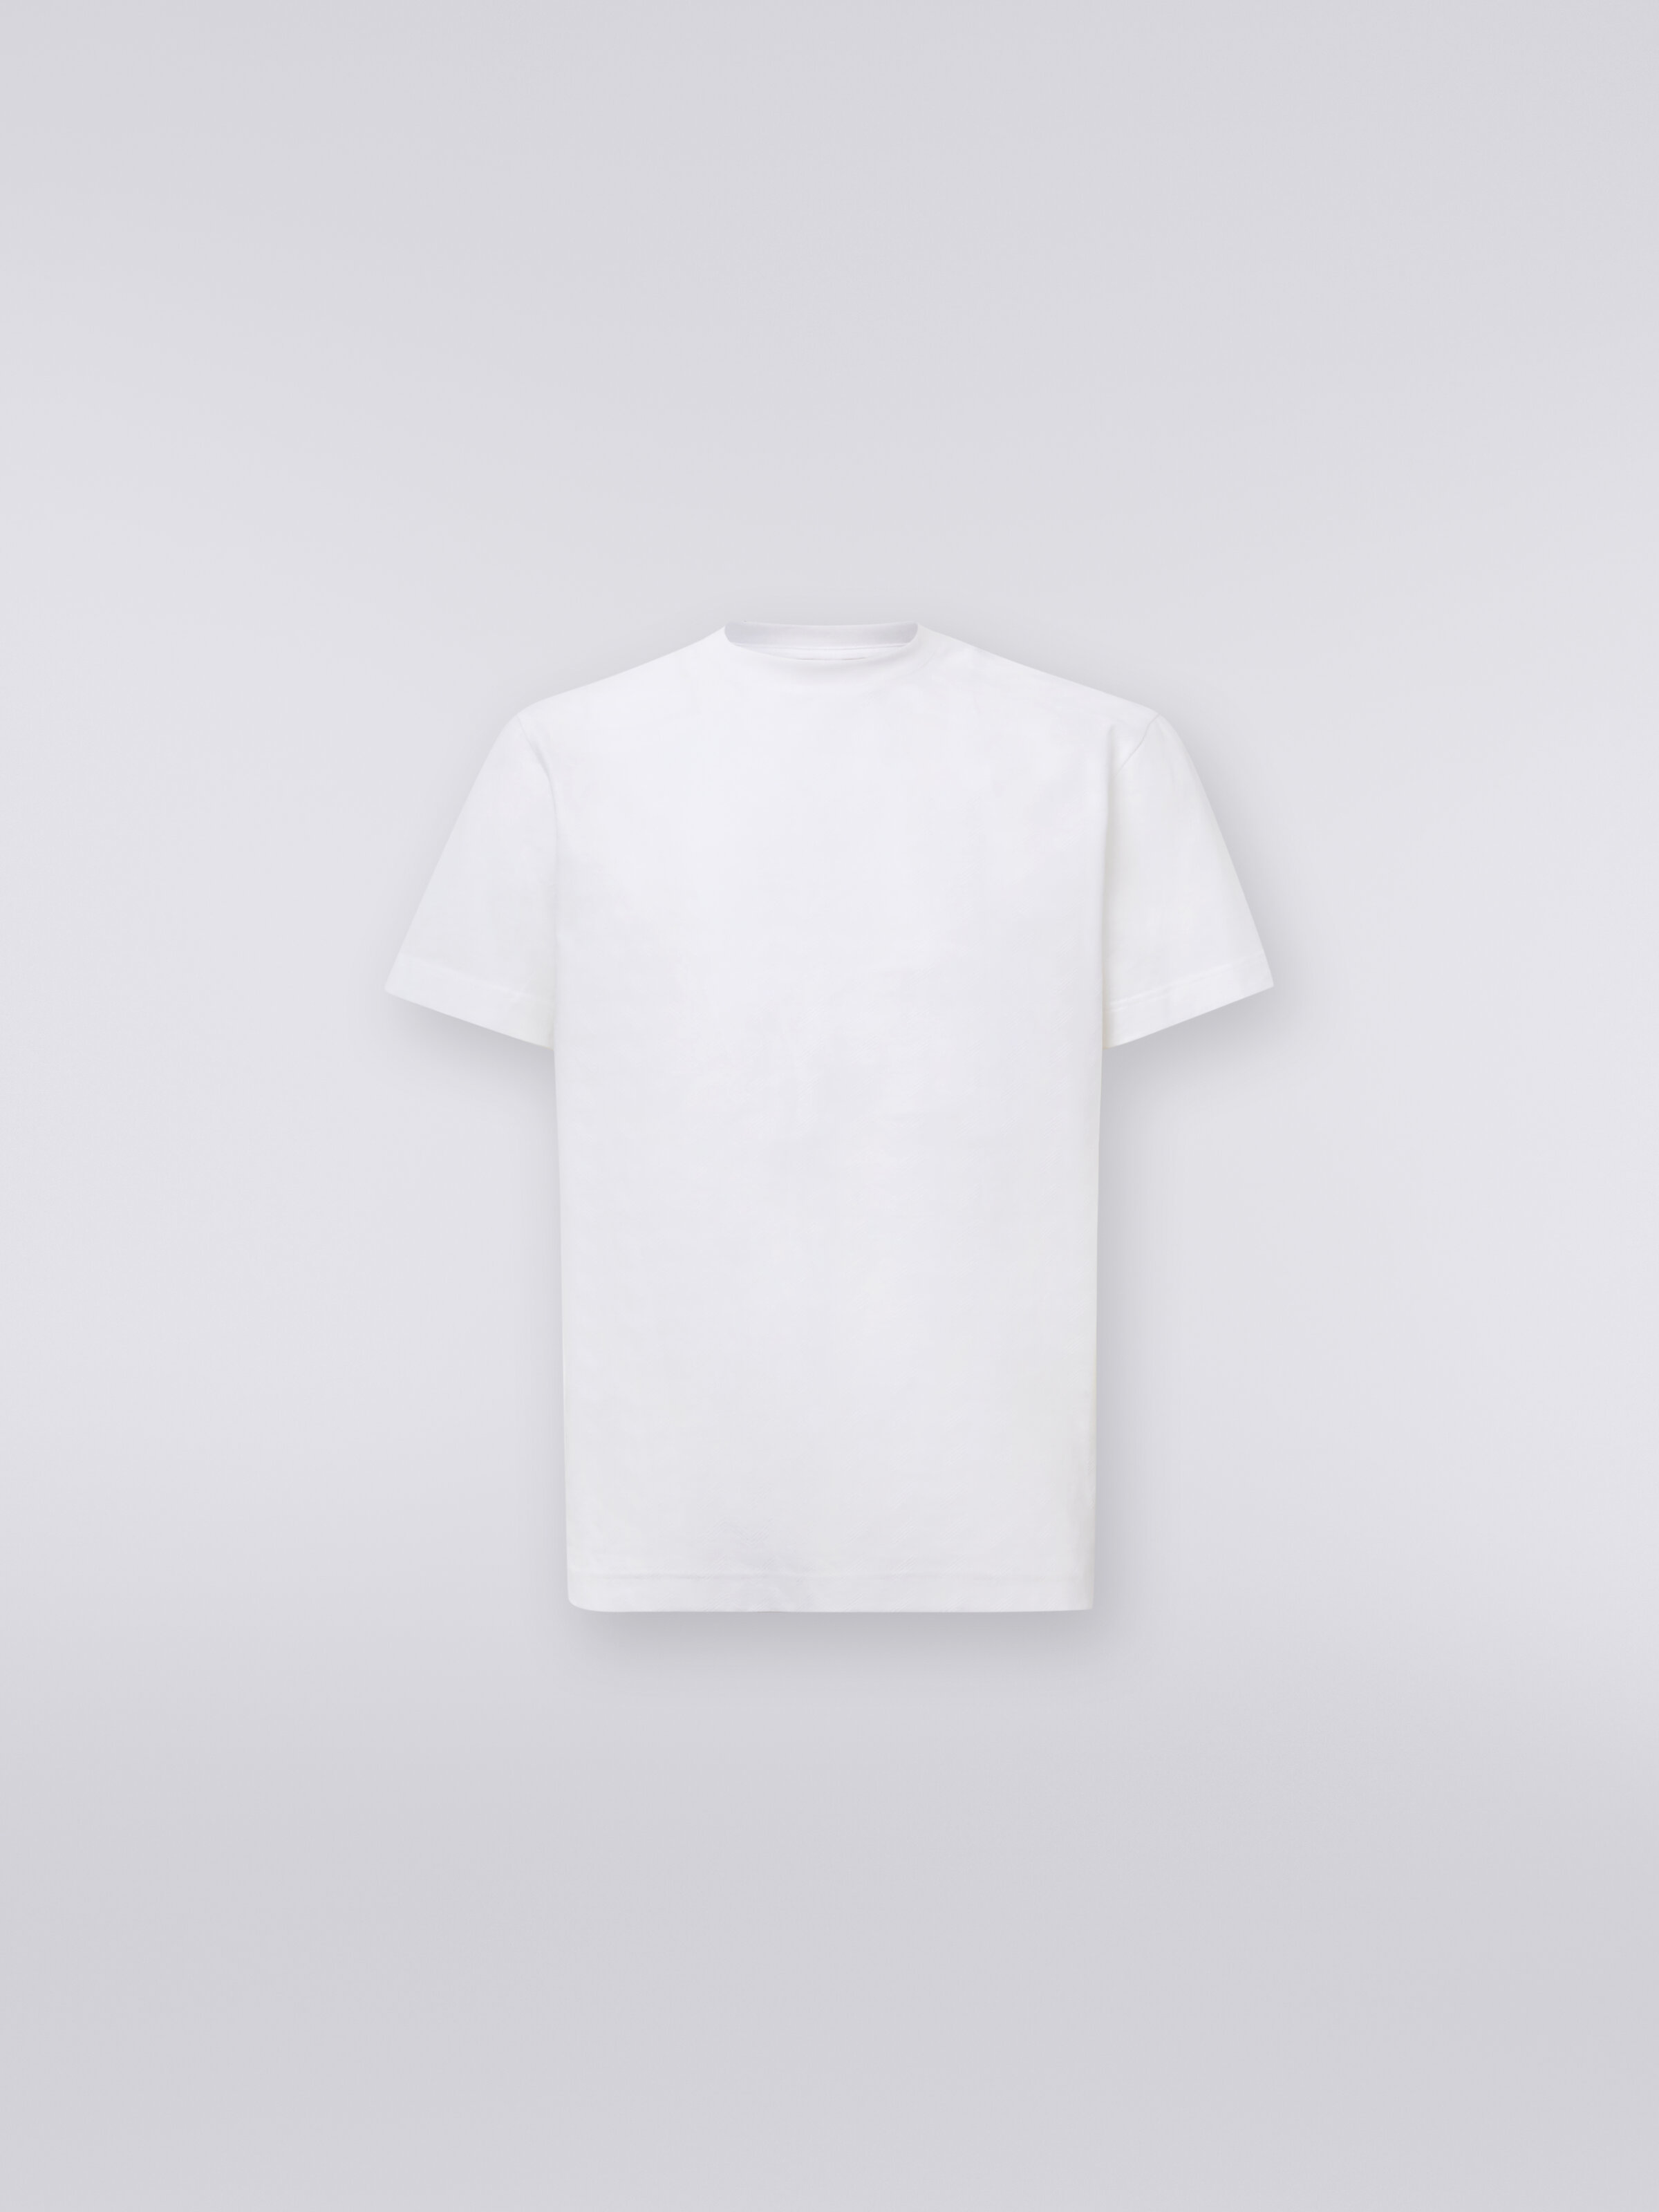 Short-sleeved T-shirt in zigzag cotton, White  - 0